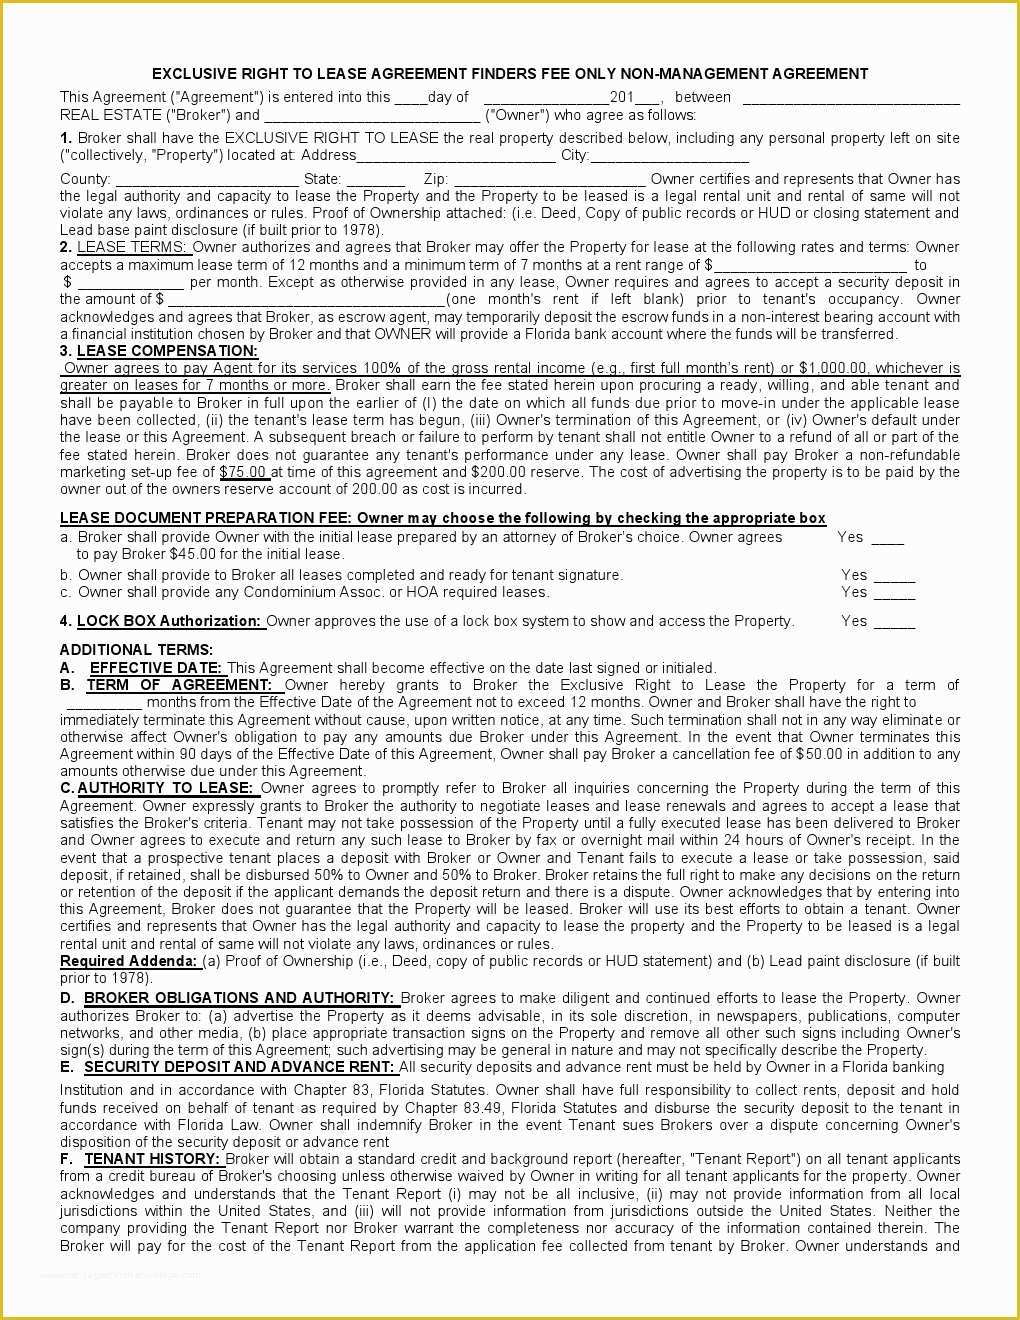 Free Florida Residential Lease Agreement Template Of Free Florida Rental Lease Agreement form